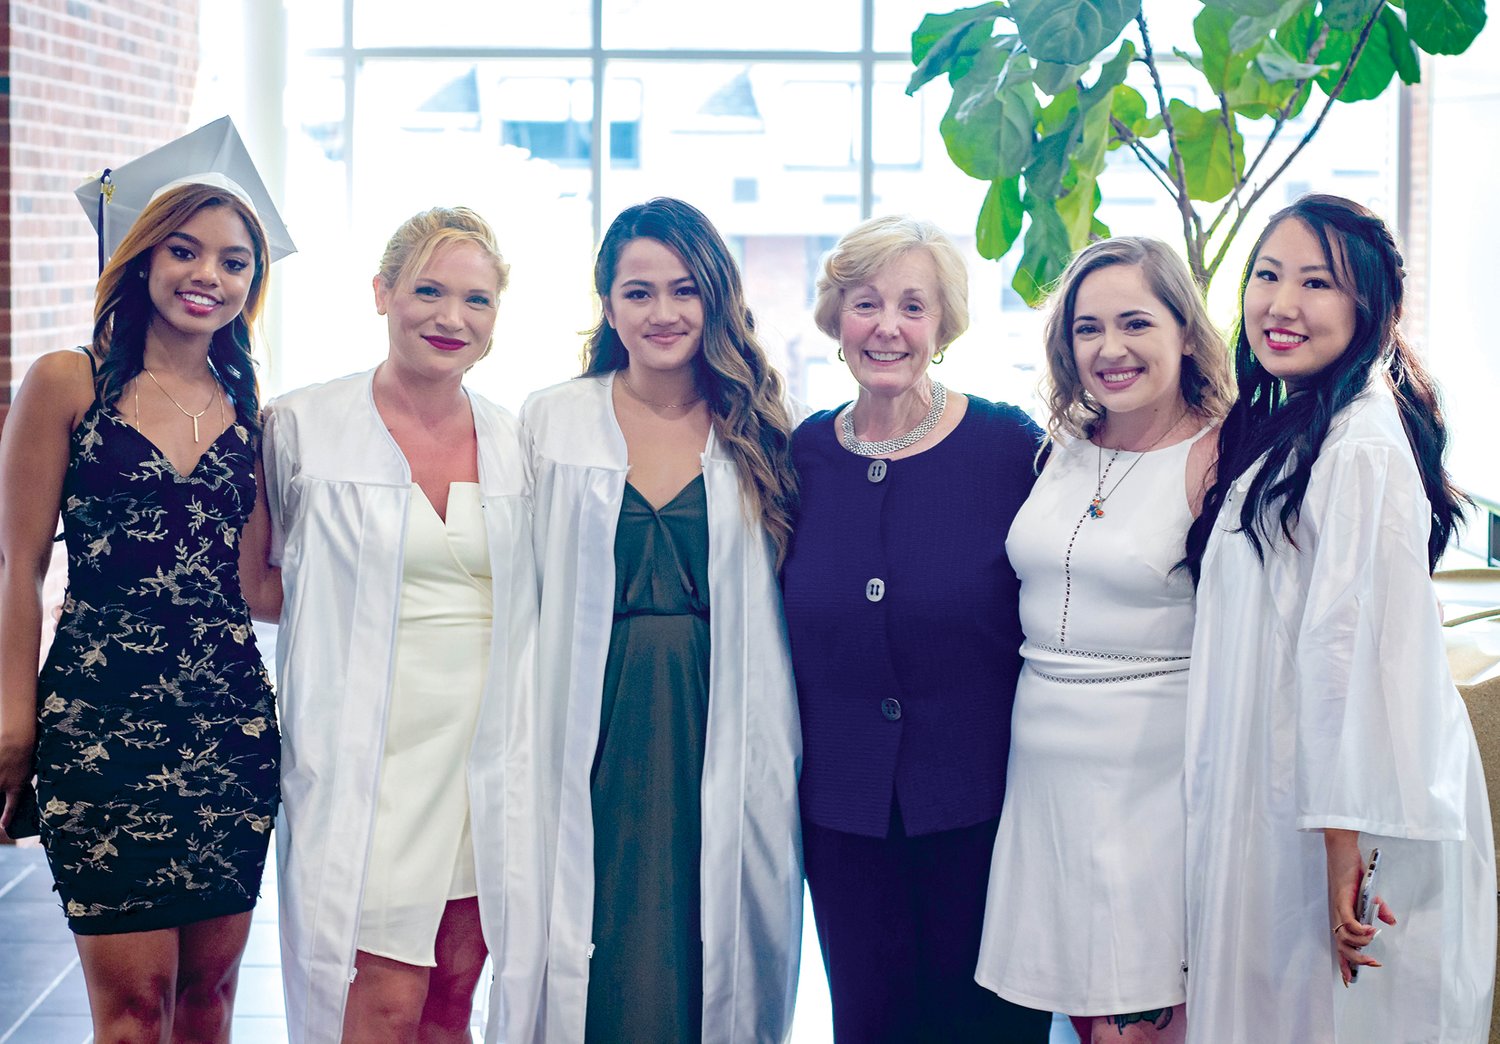 Several graduates of Bucks County Community College’s top-ranked practical nursing program gathered to thank one of their instructors just before their June 28 graduation ceremony at the Newtown campus. They are, from left, Sierra Thomas of Levittown, Anna Muncy of Southampton, Winnie Chung of Bensalem, instructor Elizabeth Franco, Joanna Sharpe of Bensalem, and Noel Han of Philadelphia.